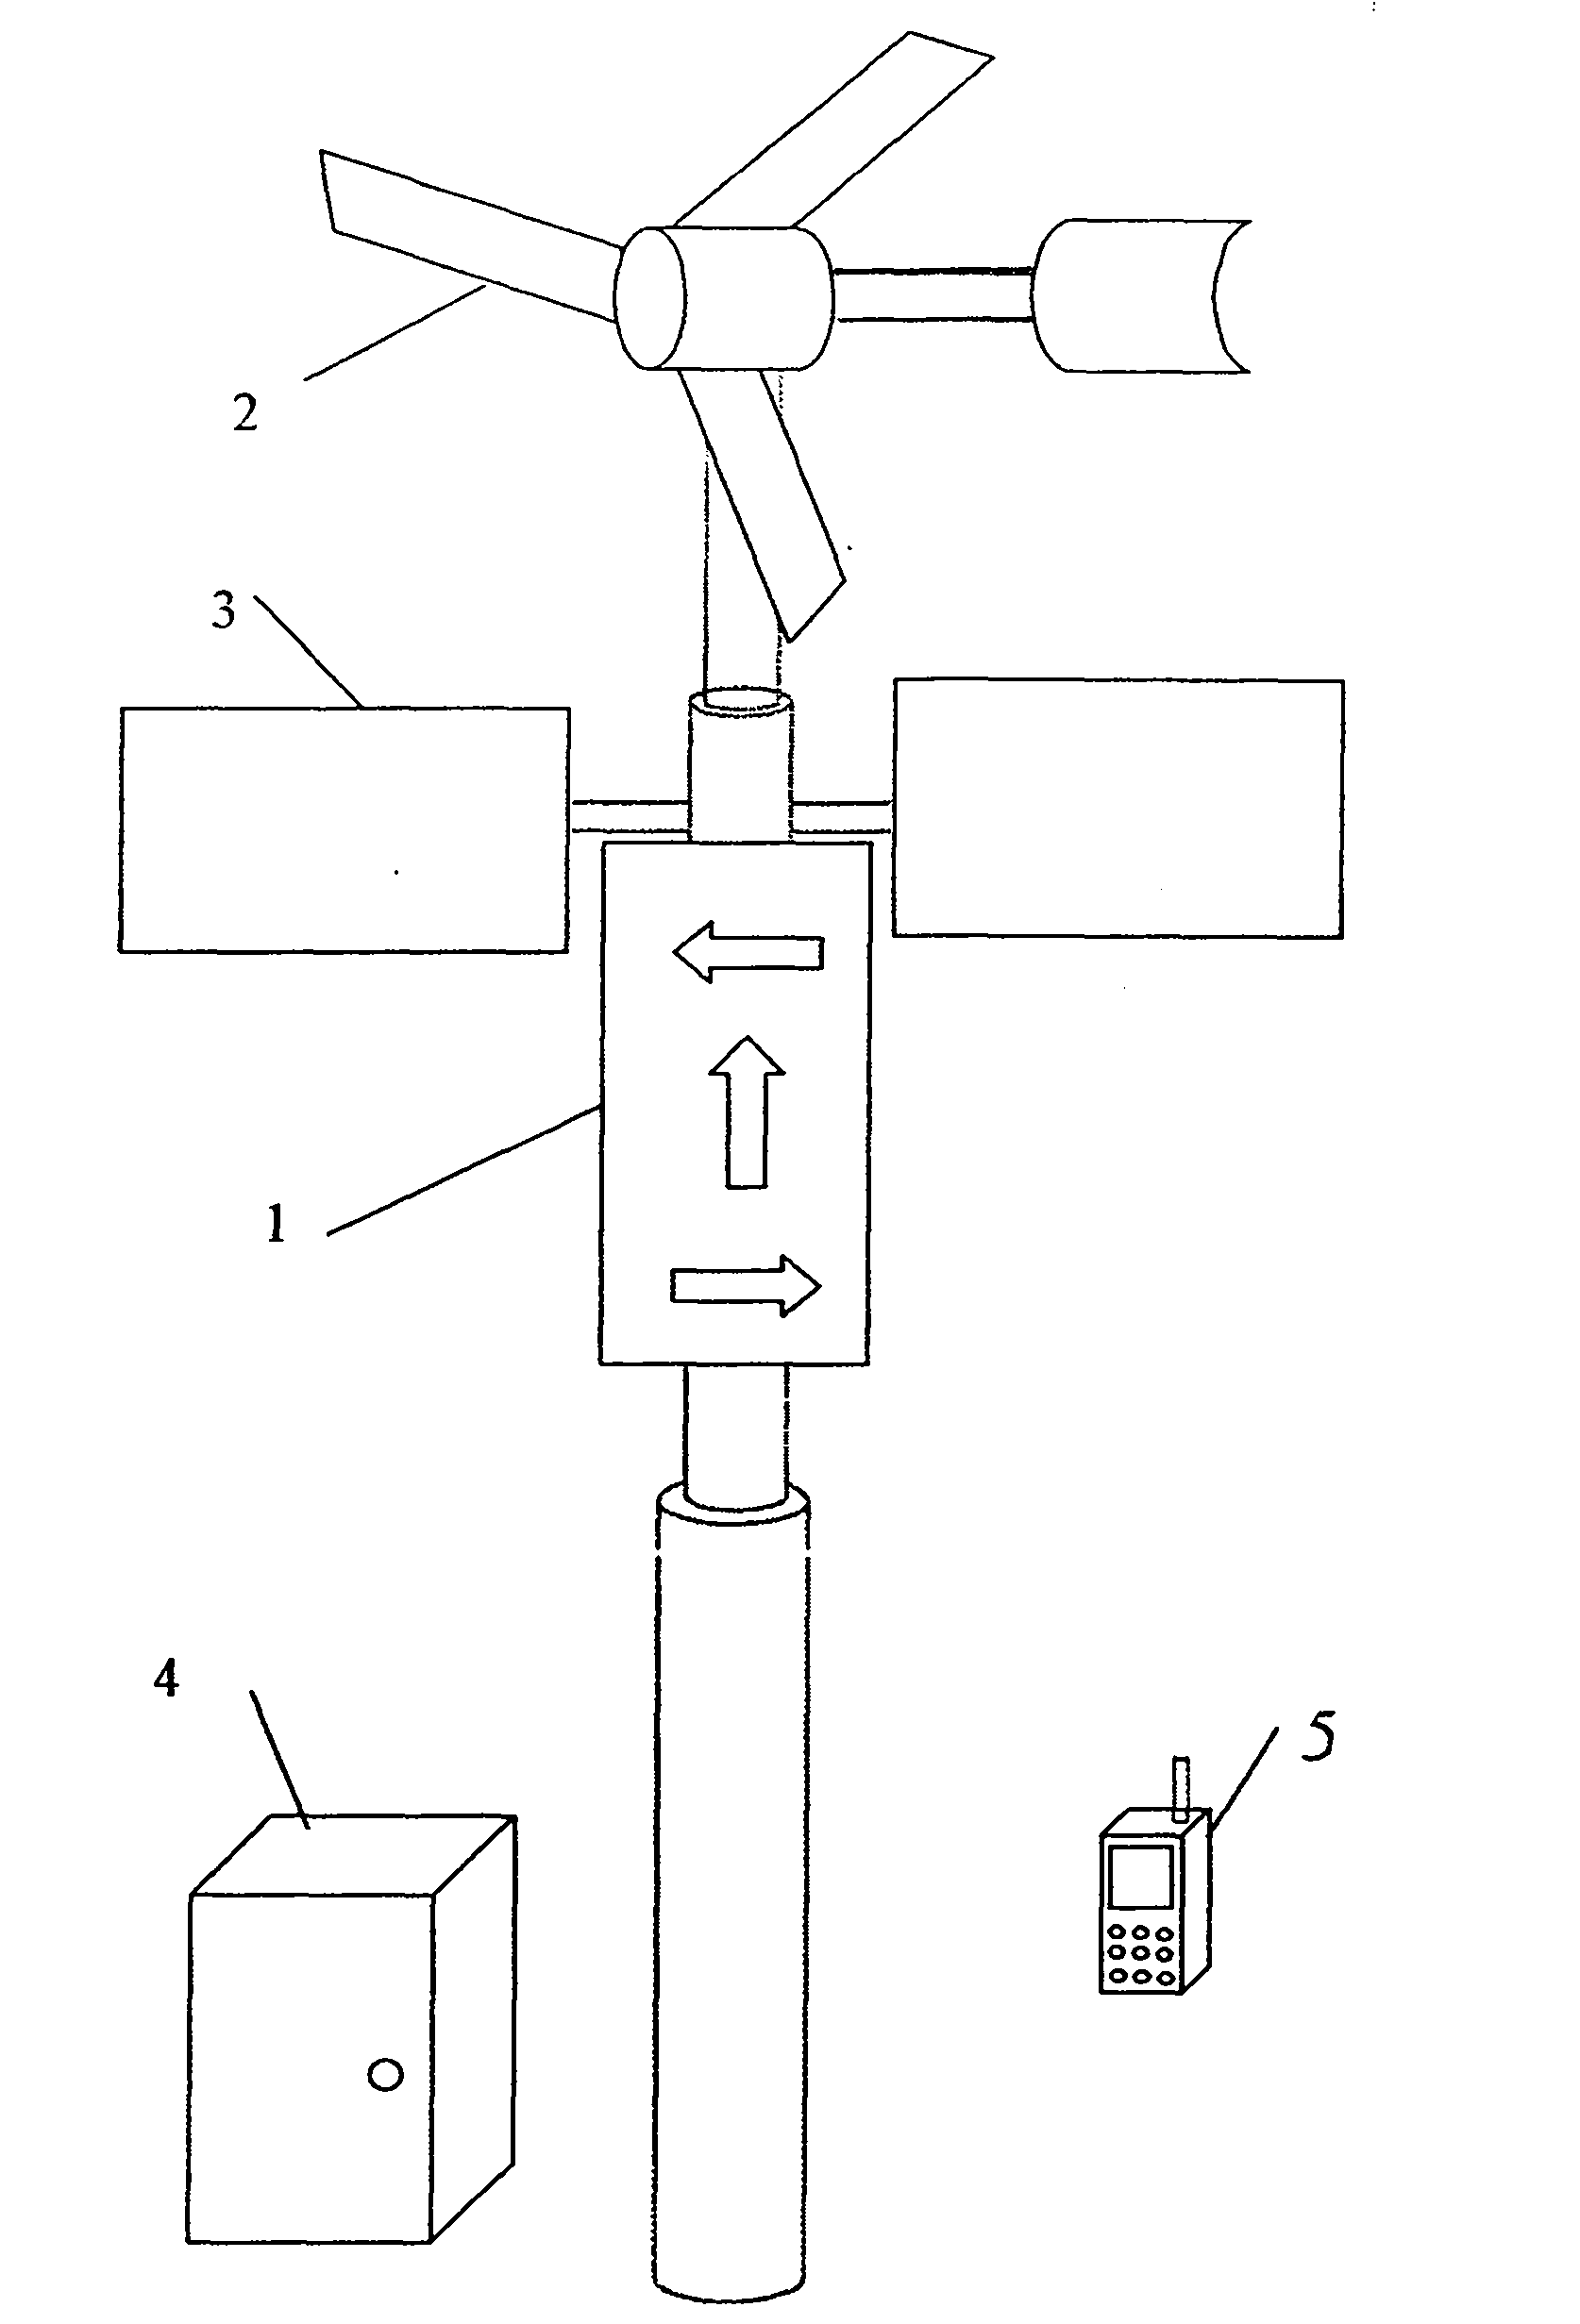 Traffic signal control device using power generated by wind-solar hybrid power supply system as power supply